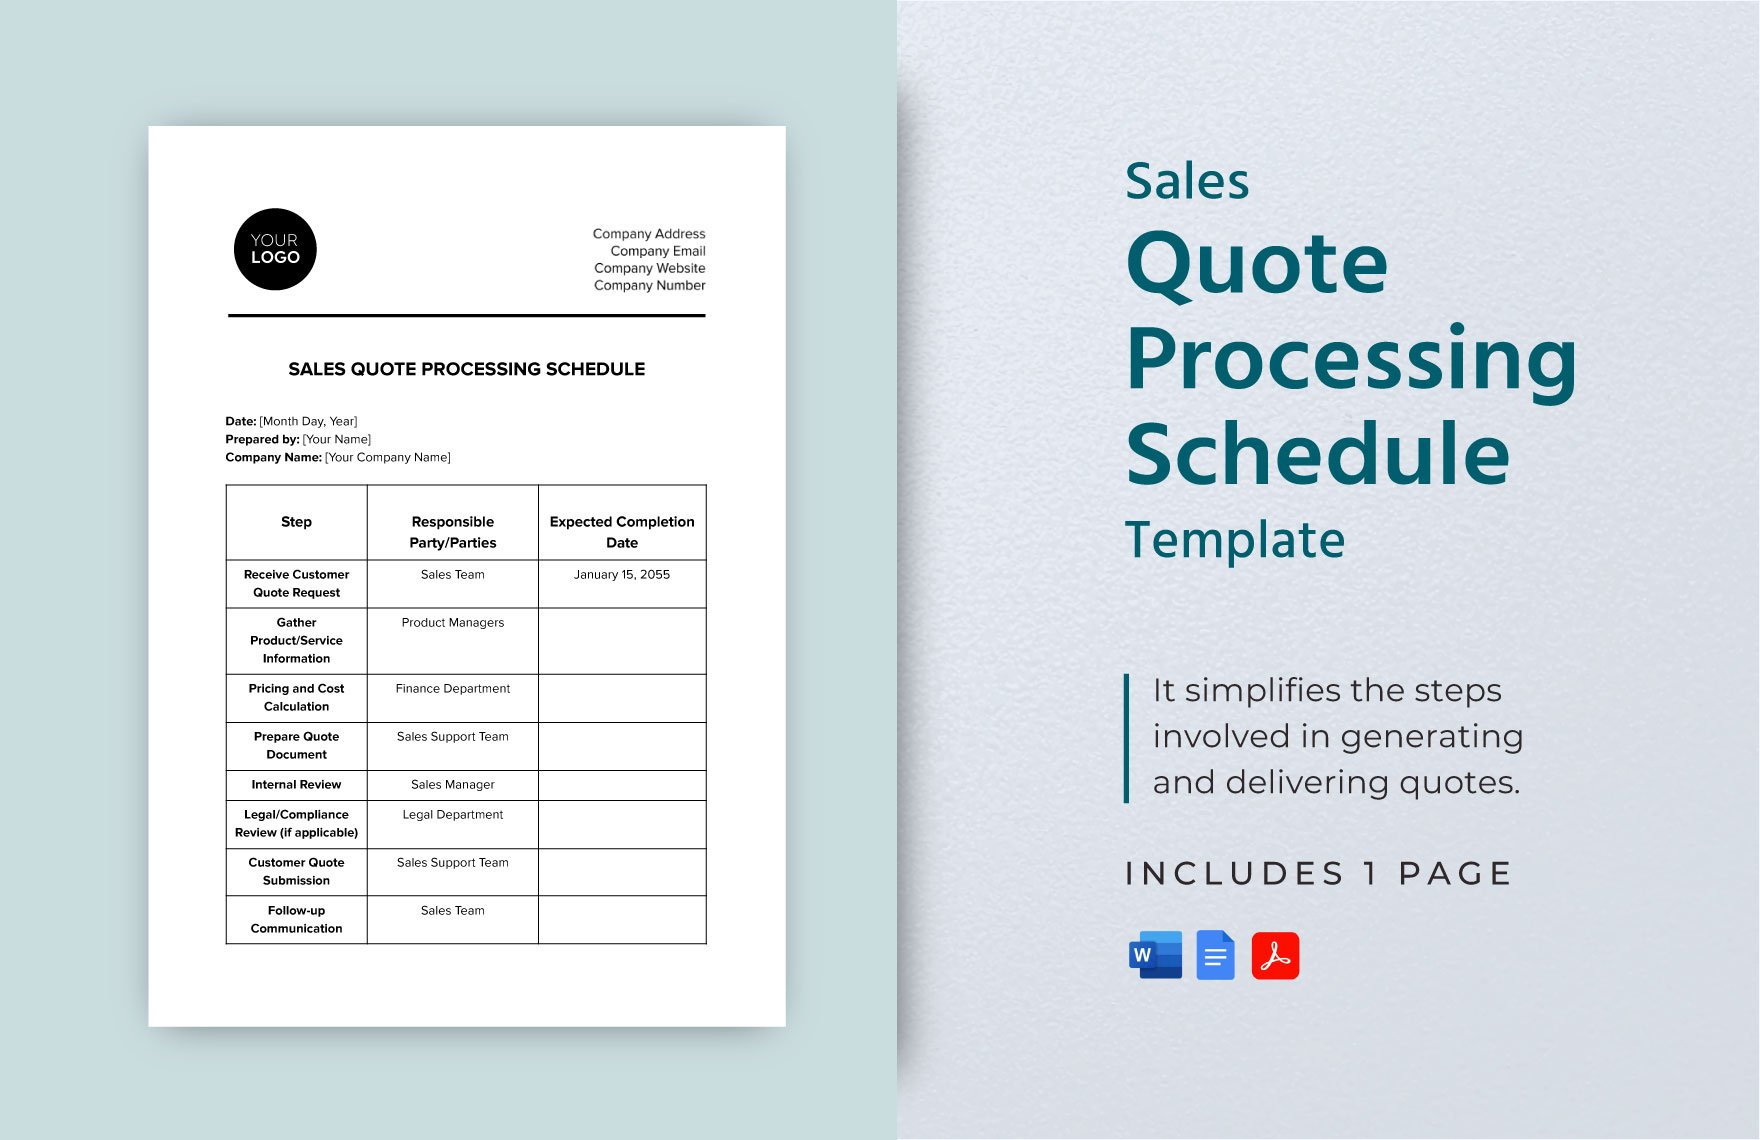 Sales Quote Processing Schedule Template in Word, Google Docs, PDF